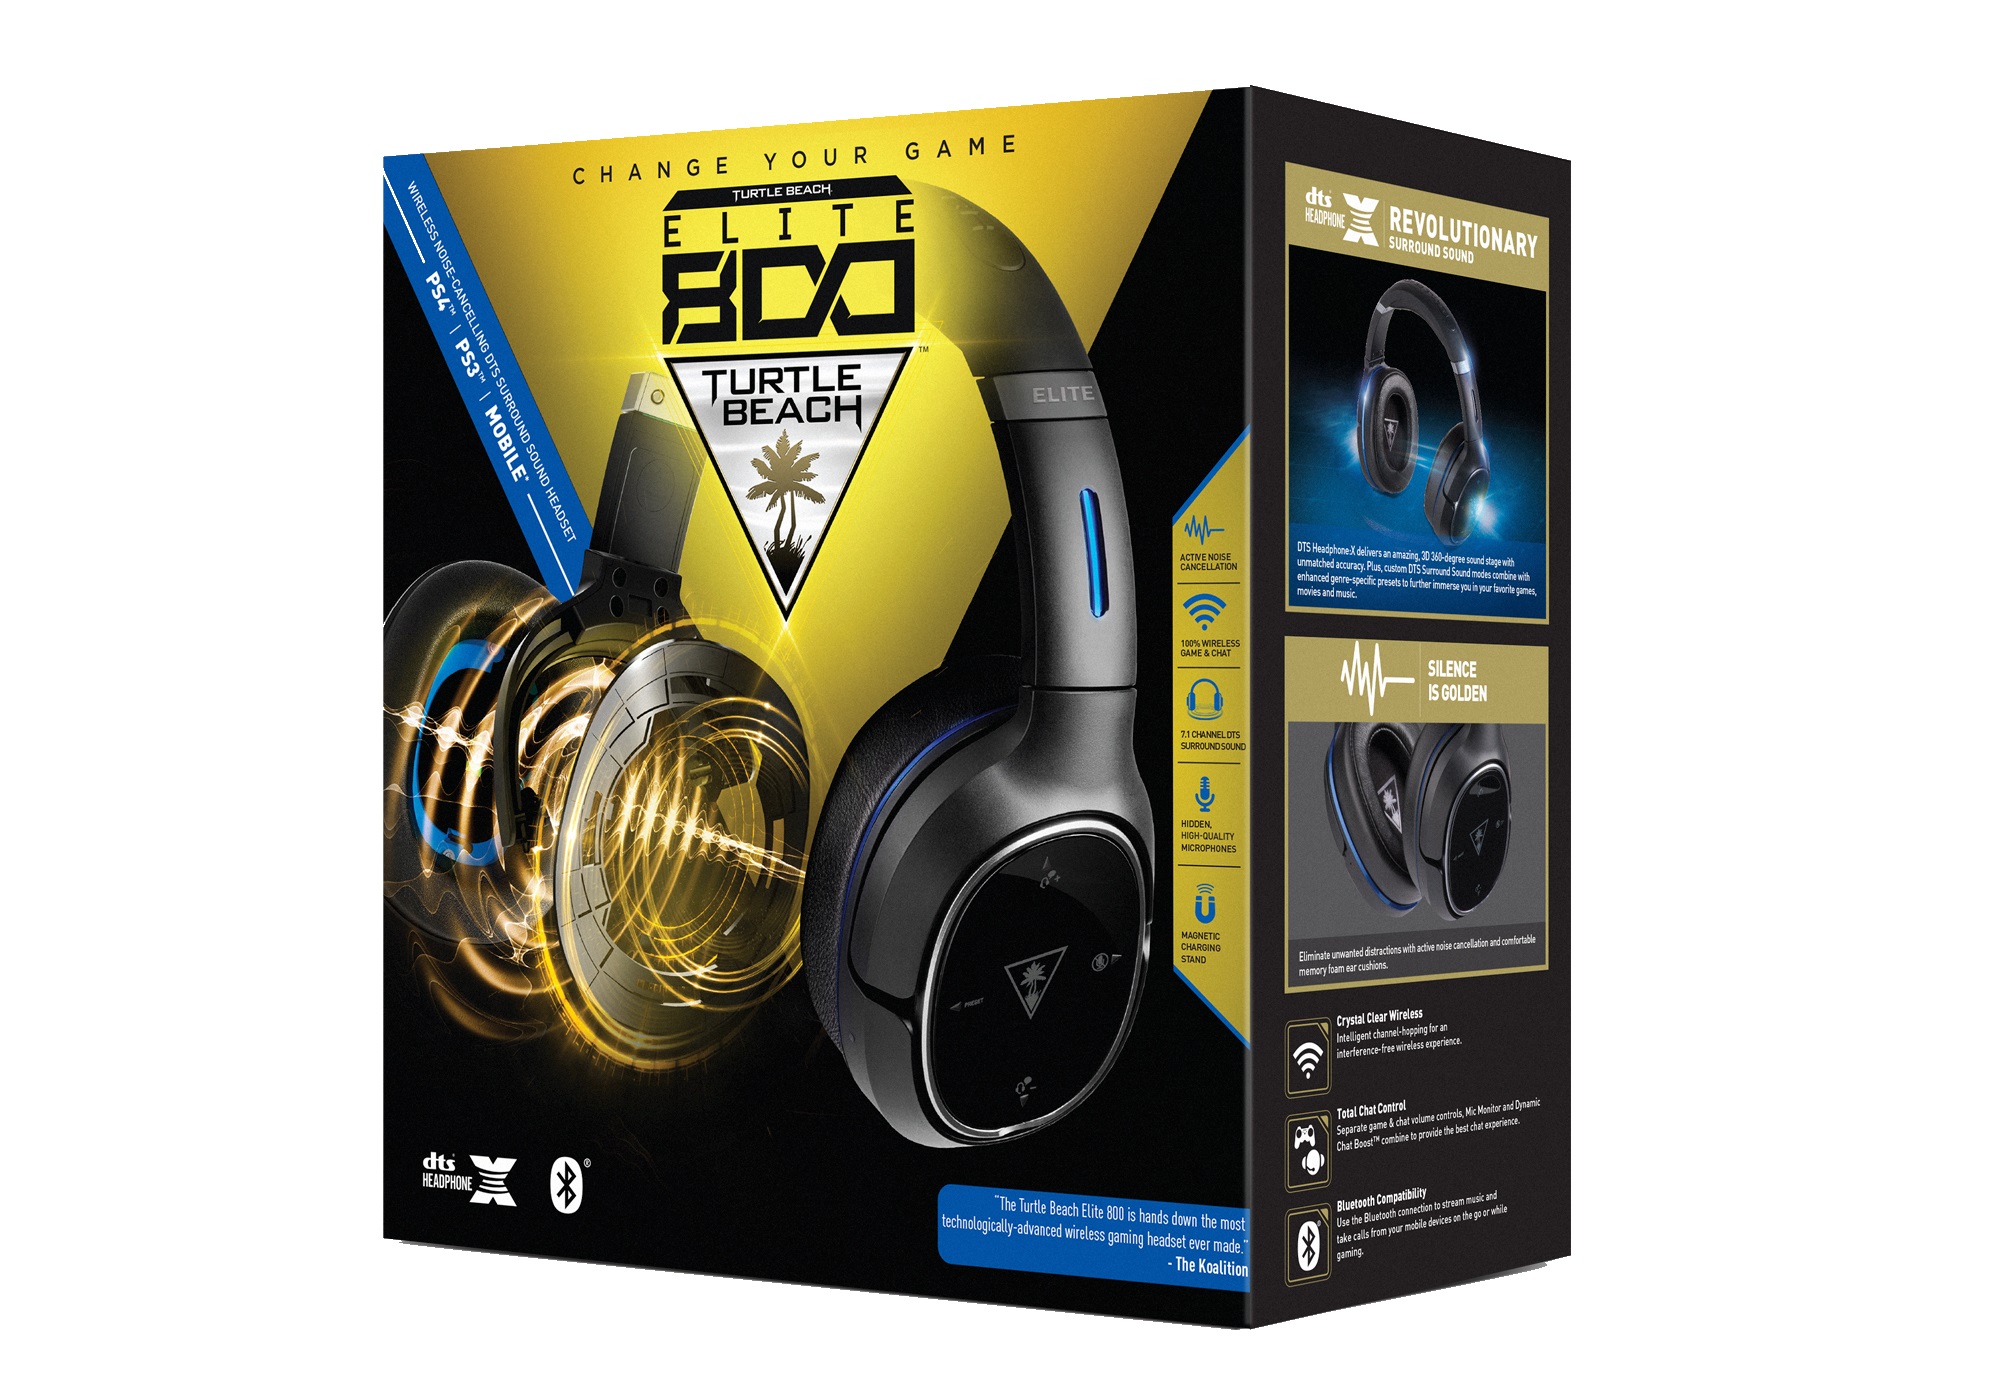 Hardware Review: Turtle Beach Elite 800 Headset(PS4)